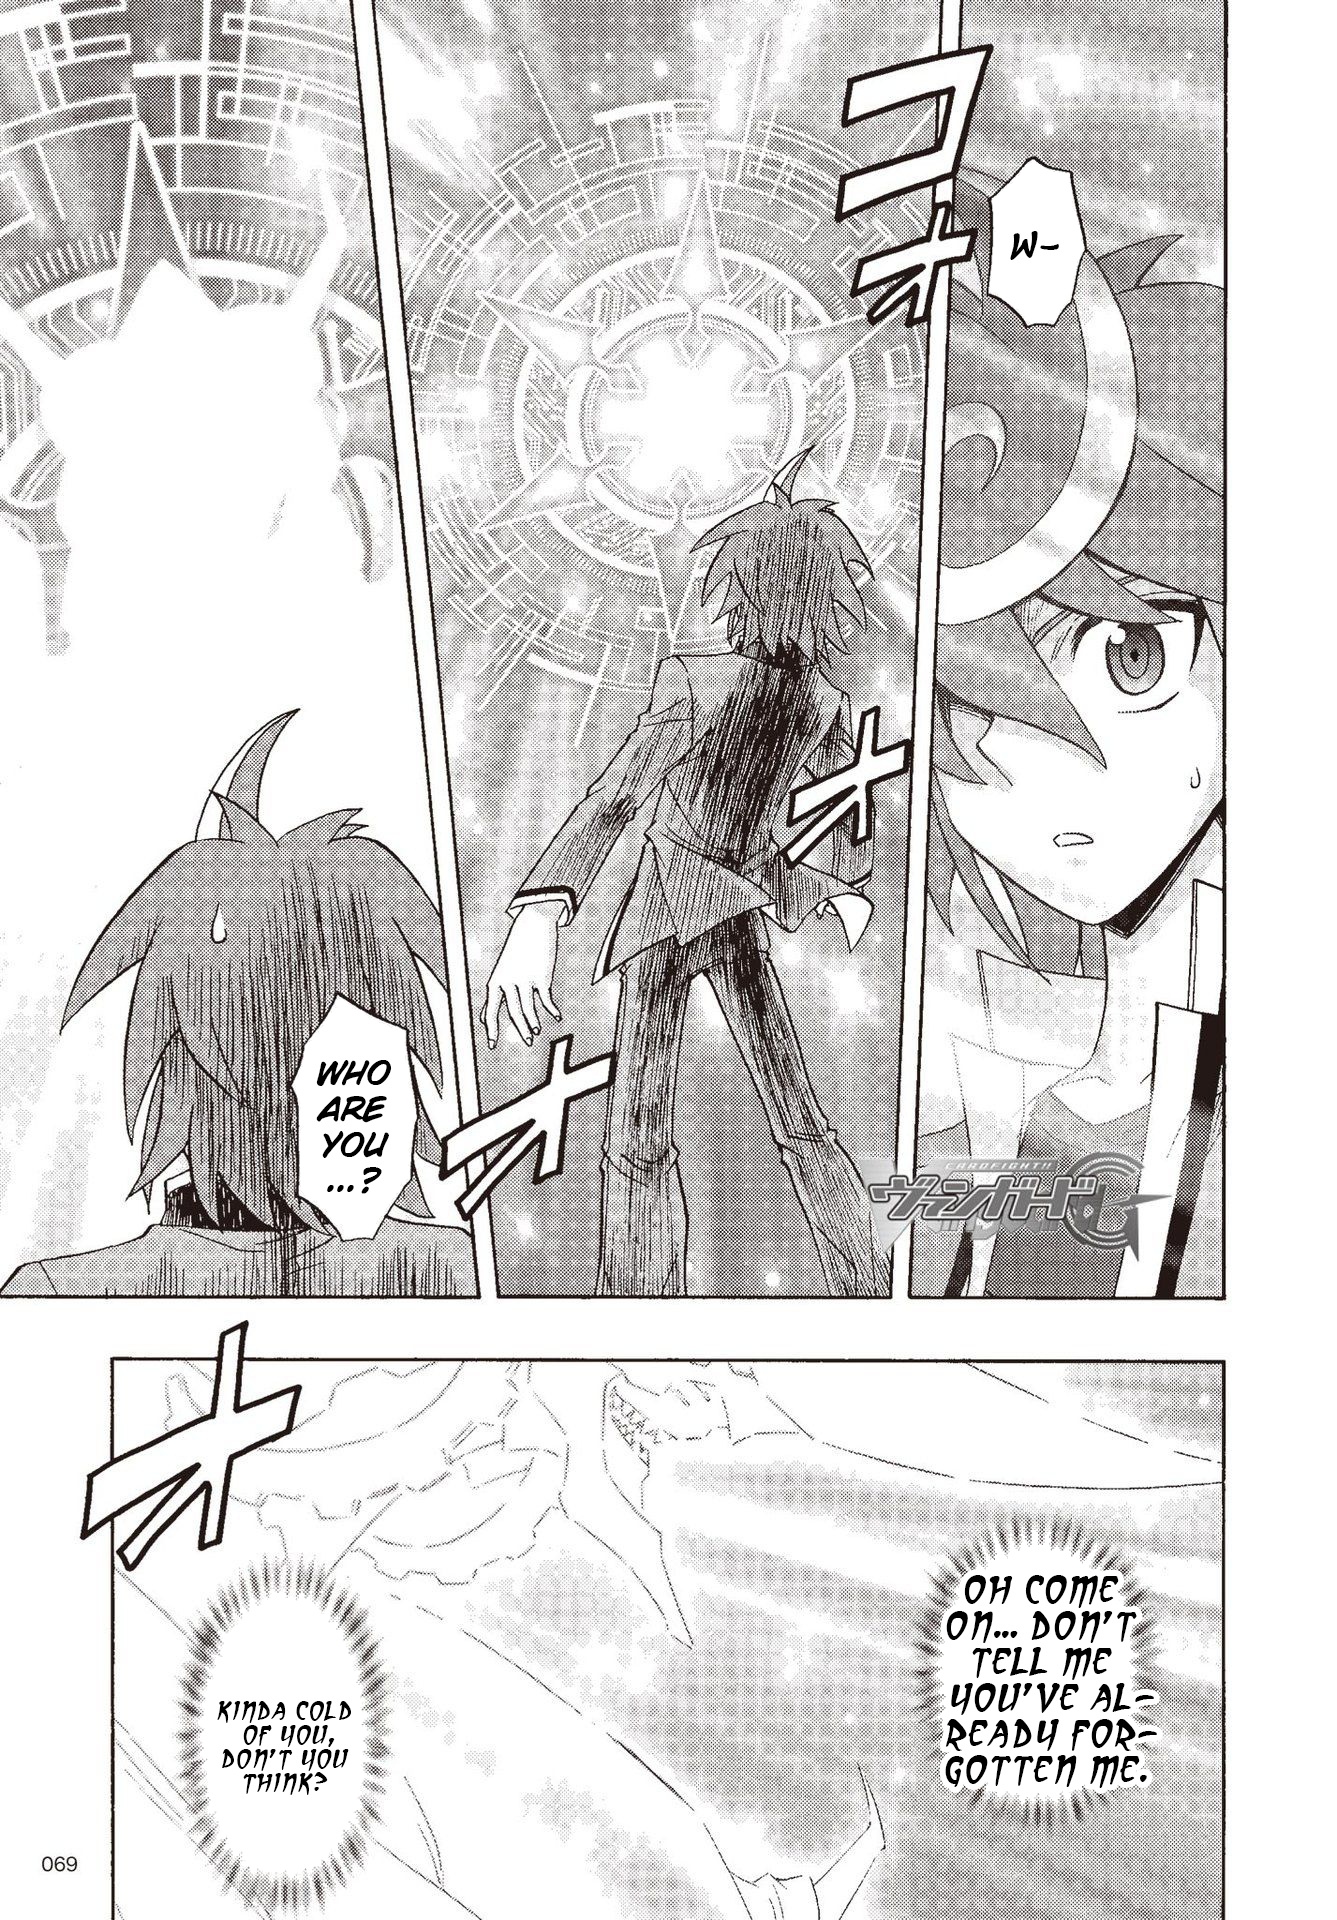 Cardfight!! Vanguard G: The Prologue Vol.1 Chapter 5: Next Stage - Picture 1